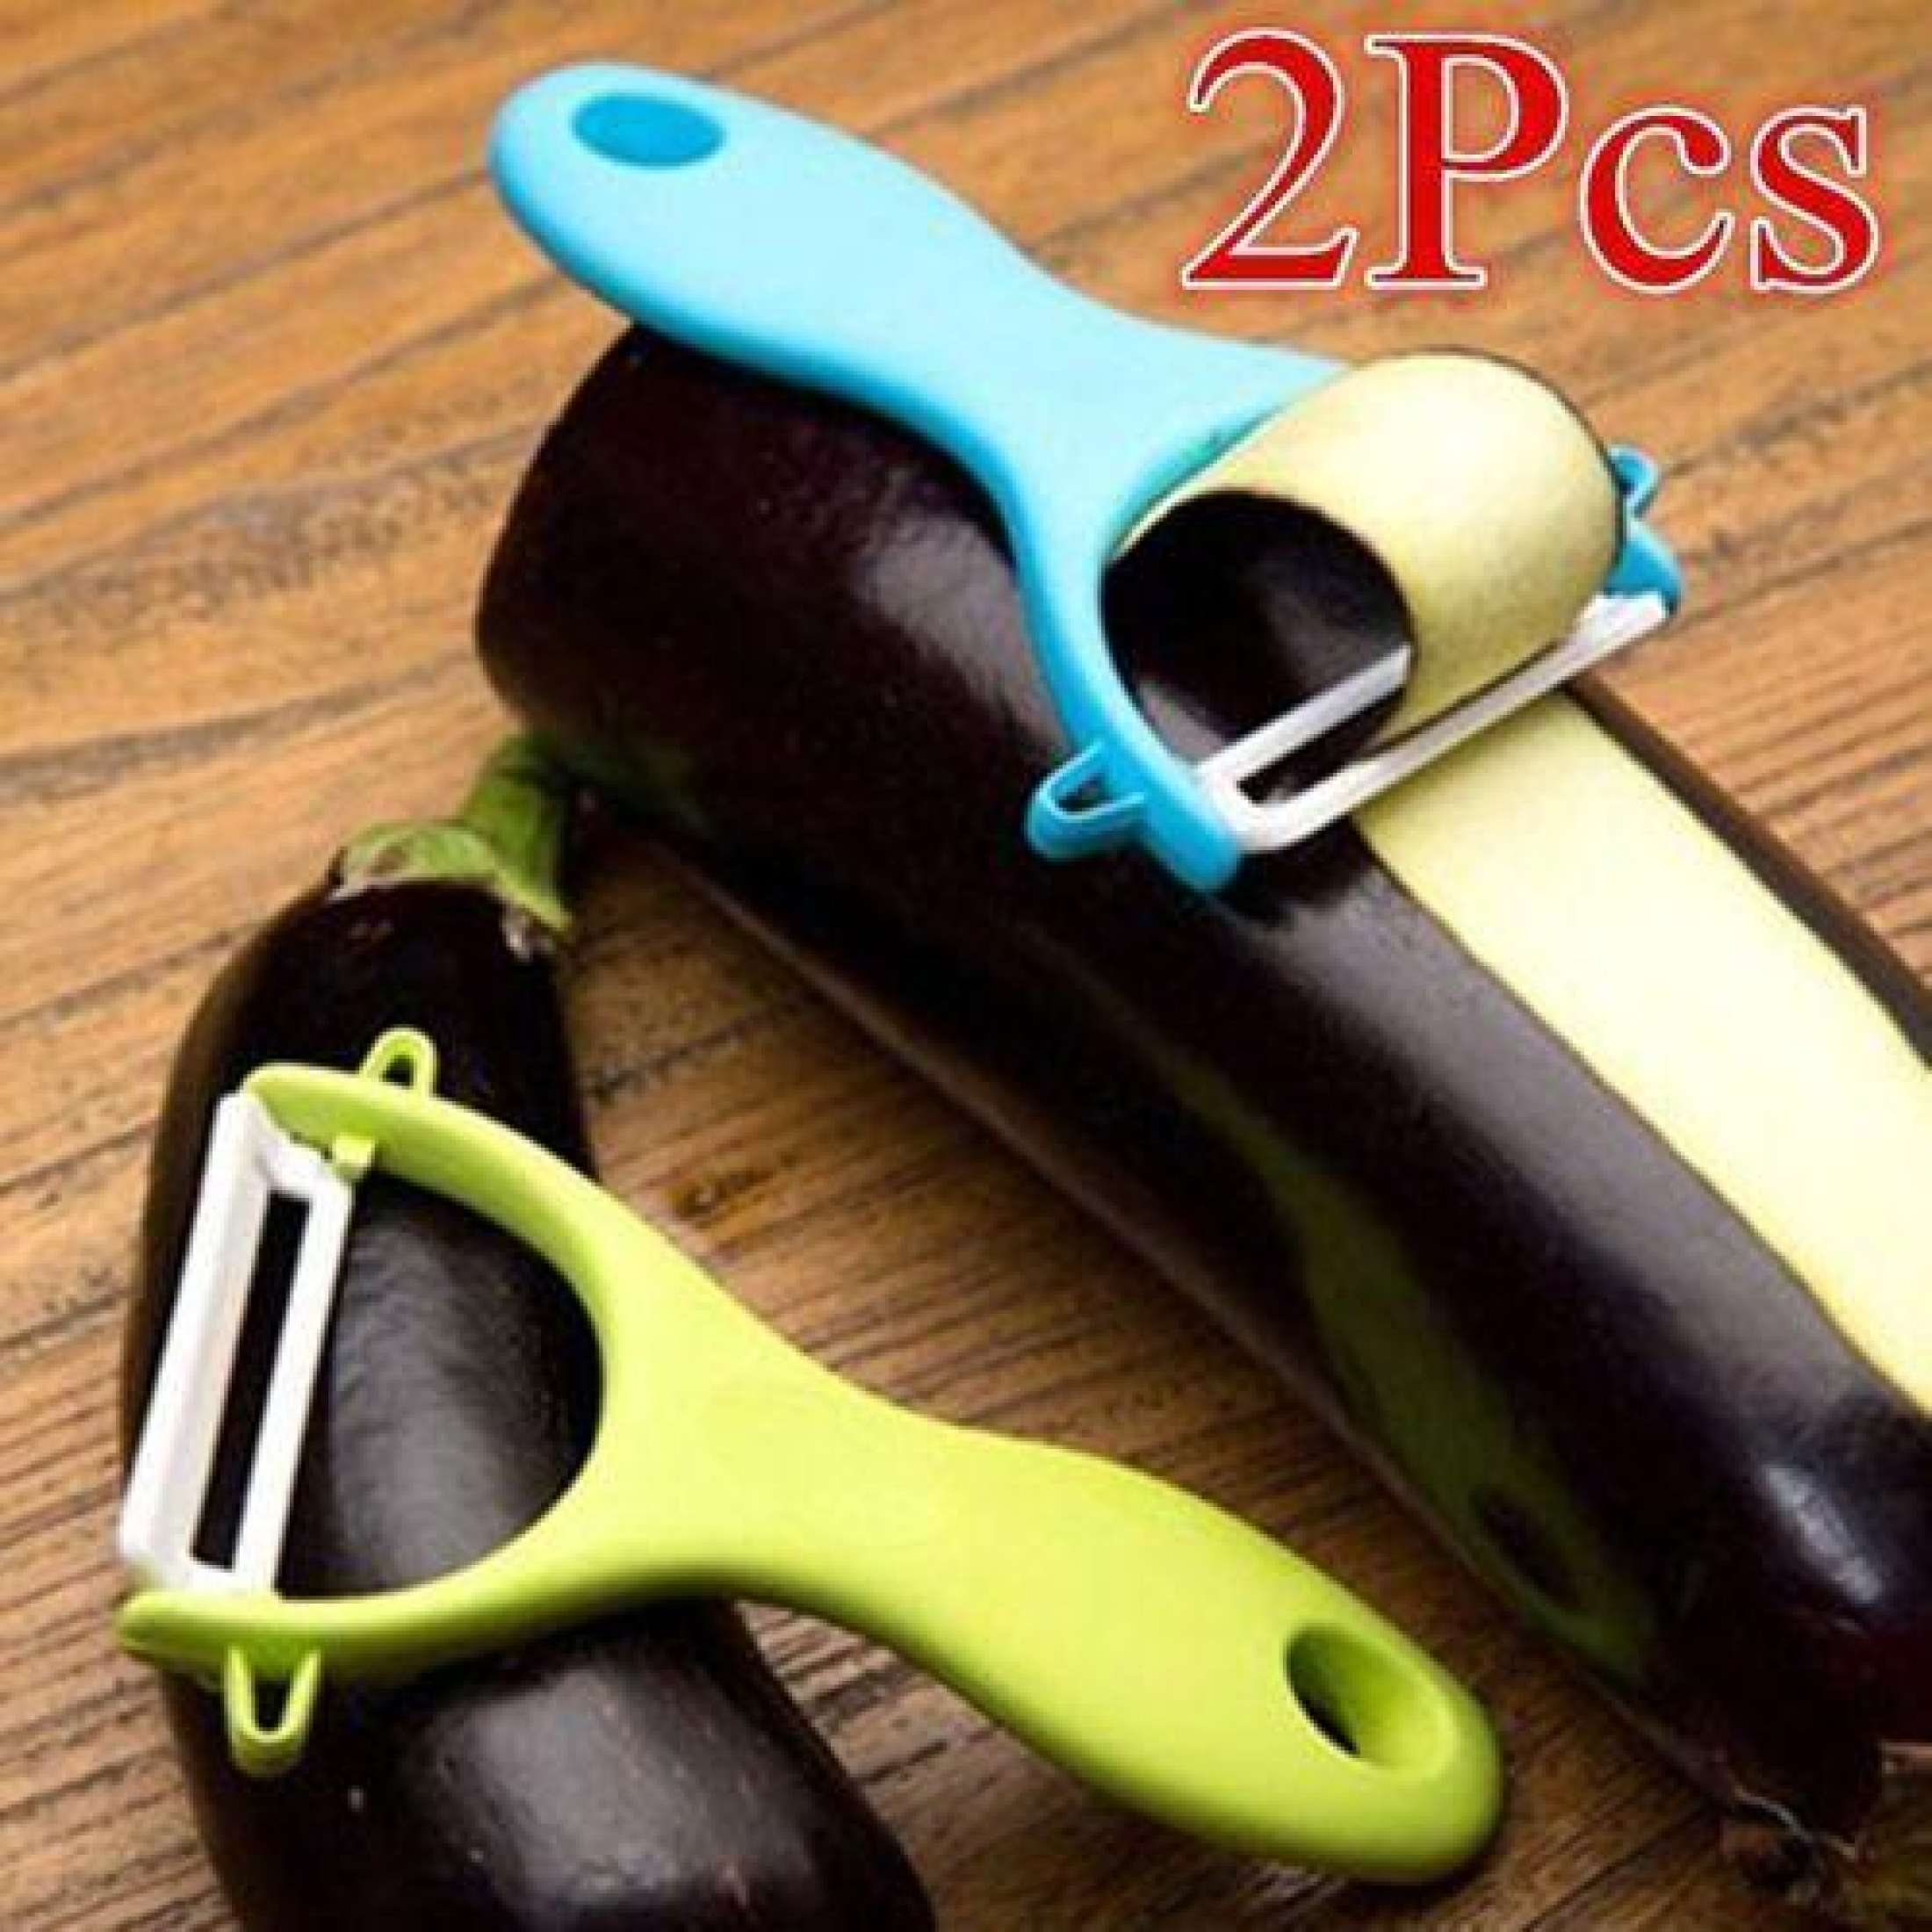 Pack of 2 - Stainless Steel With Hard Plastic Body - Vegetable, Fruit ...